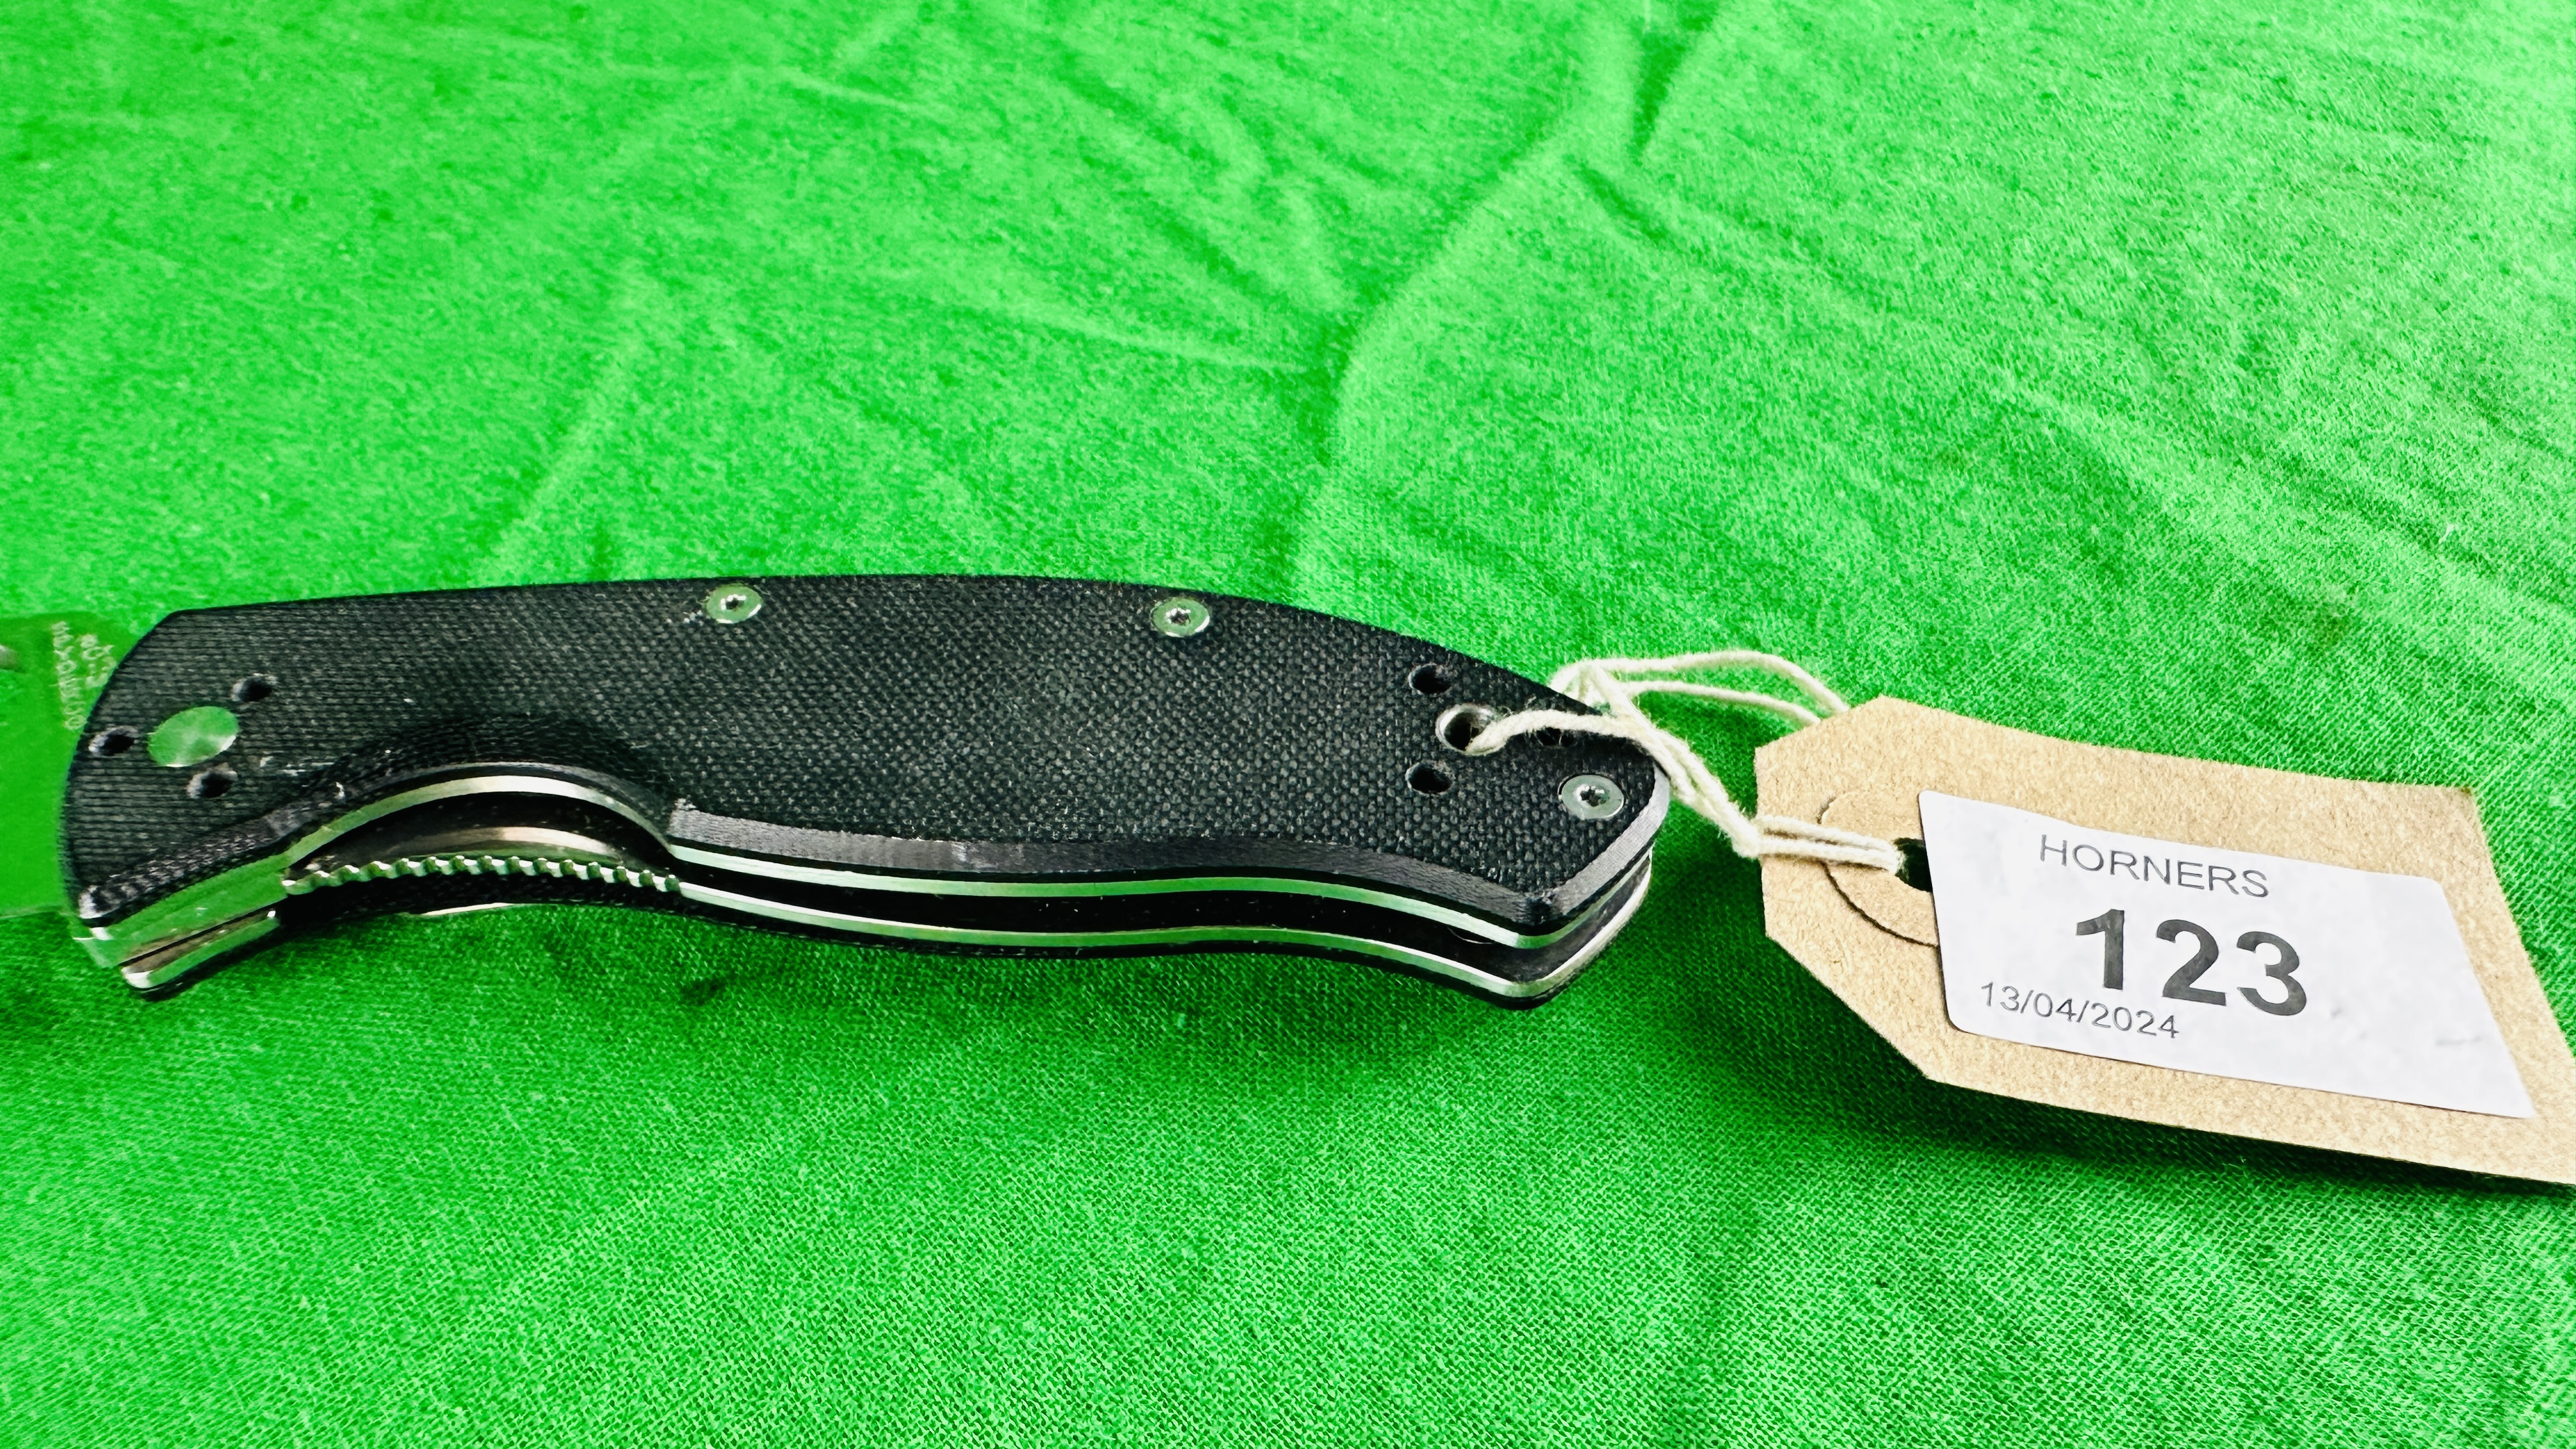 SPYDERCO TENACIOUS C122GP FOLDING POCKET LOCK KNIFE - NO POSTAGE OR PACKING AVAILABLE - Image 5 of 7